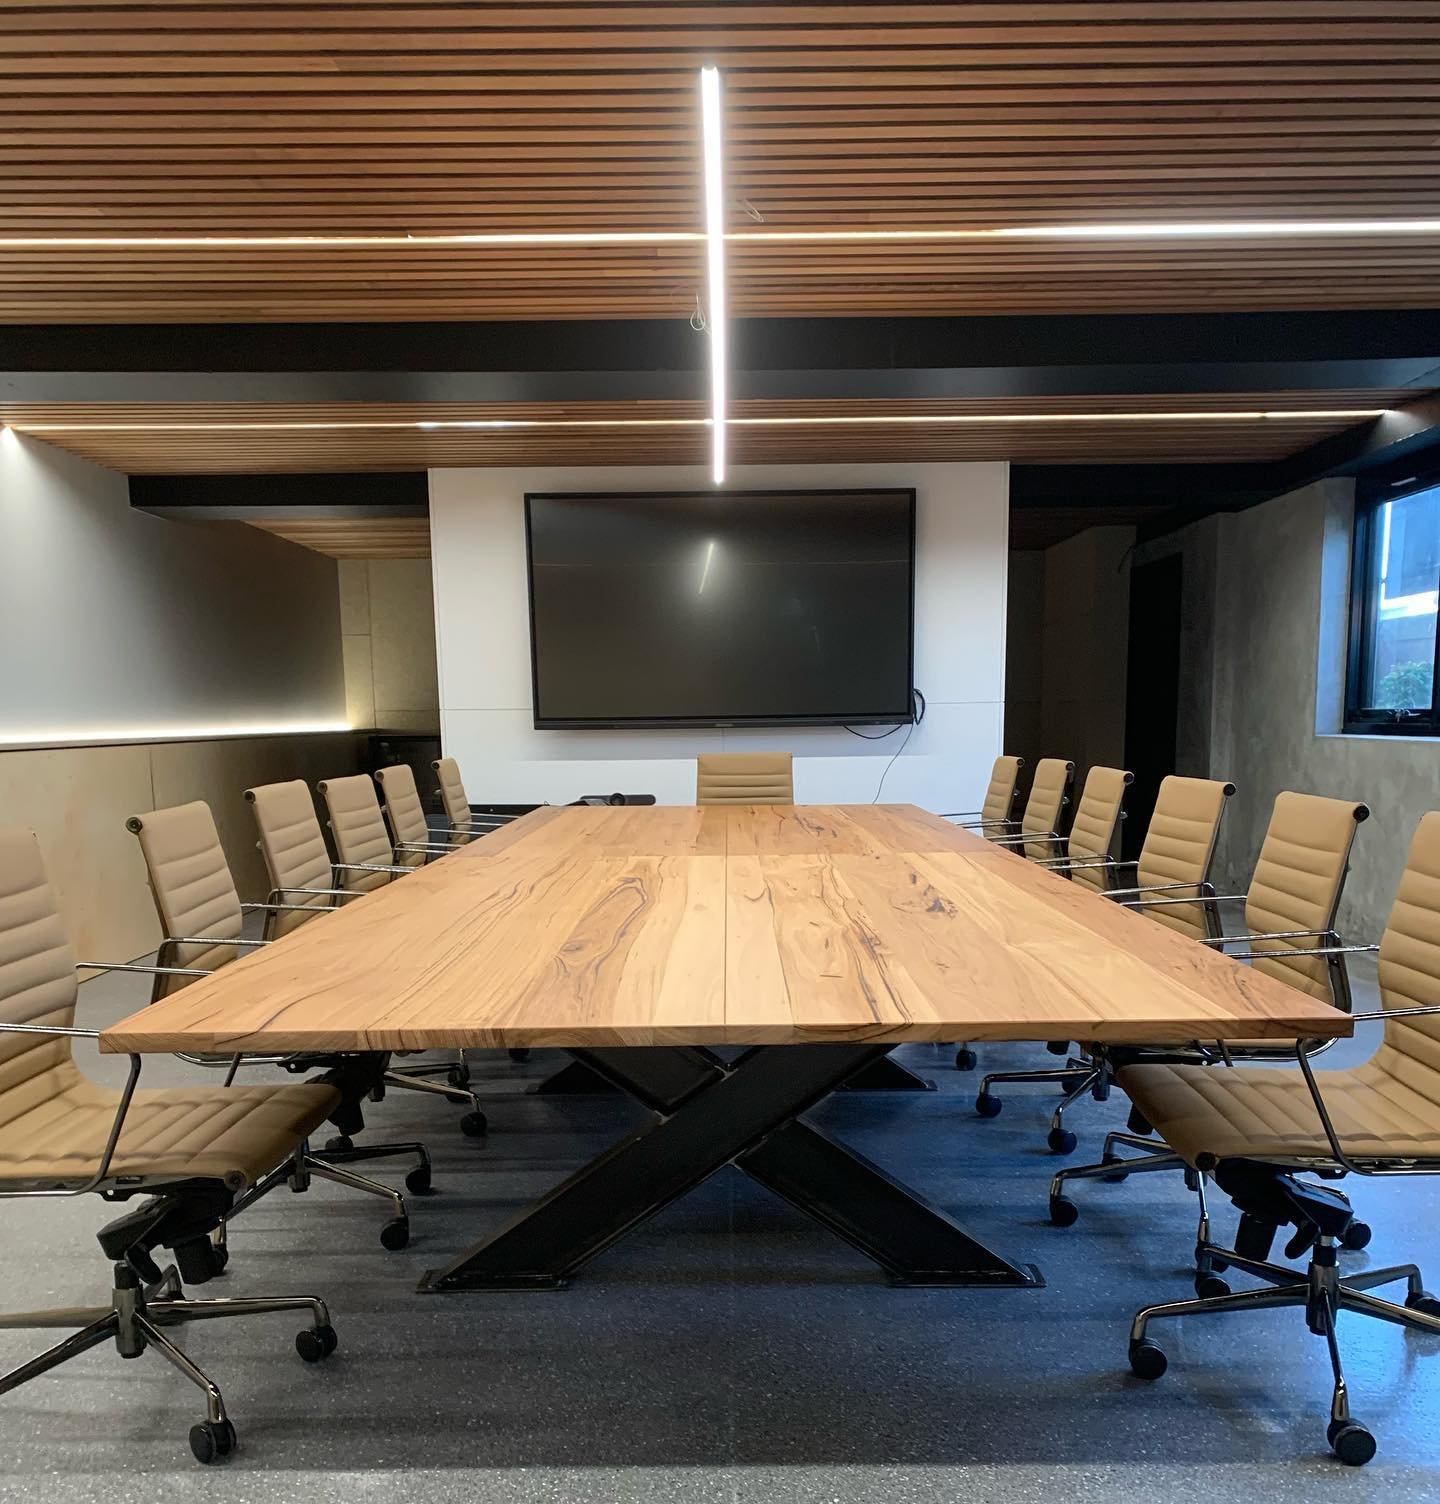 Monster boardroom table! 4800x1700. Recycled messmate. @westsystemepoxy fills. Finished with @fiddesaustralia hard wax oil. Done in quarters for a tricky access. 👍⚒️🌳